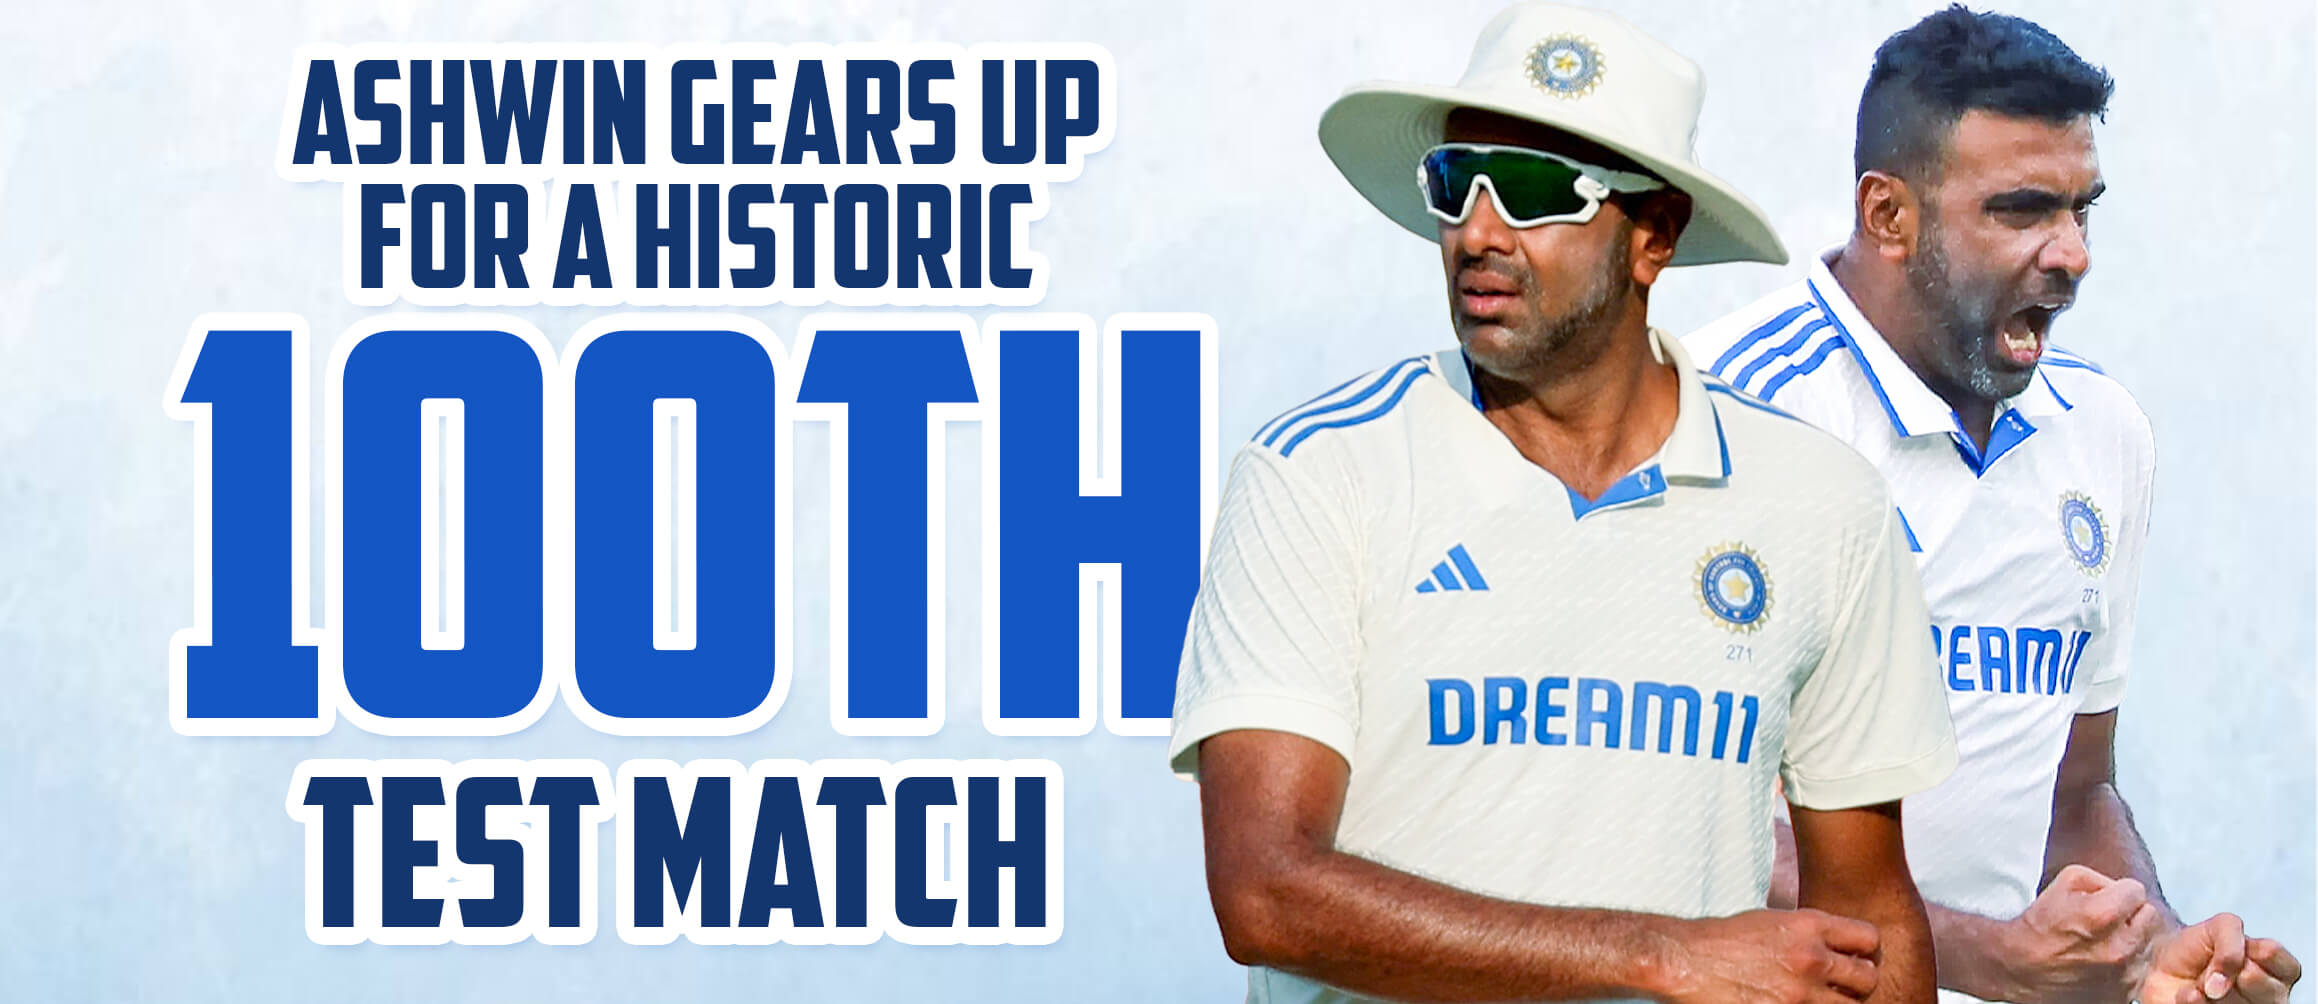 Ashwin Gears Up for a Historic 100th Test Match